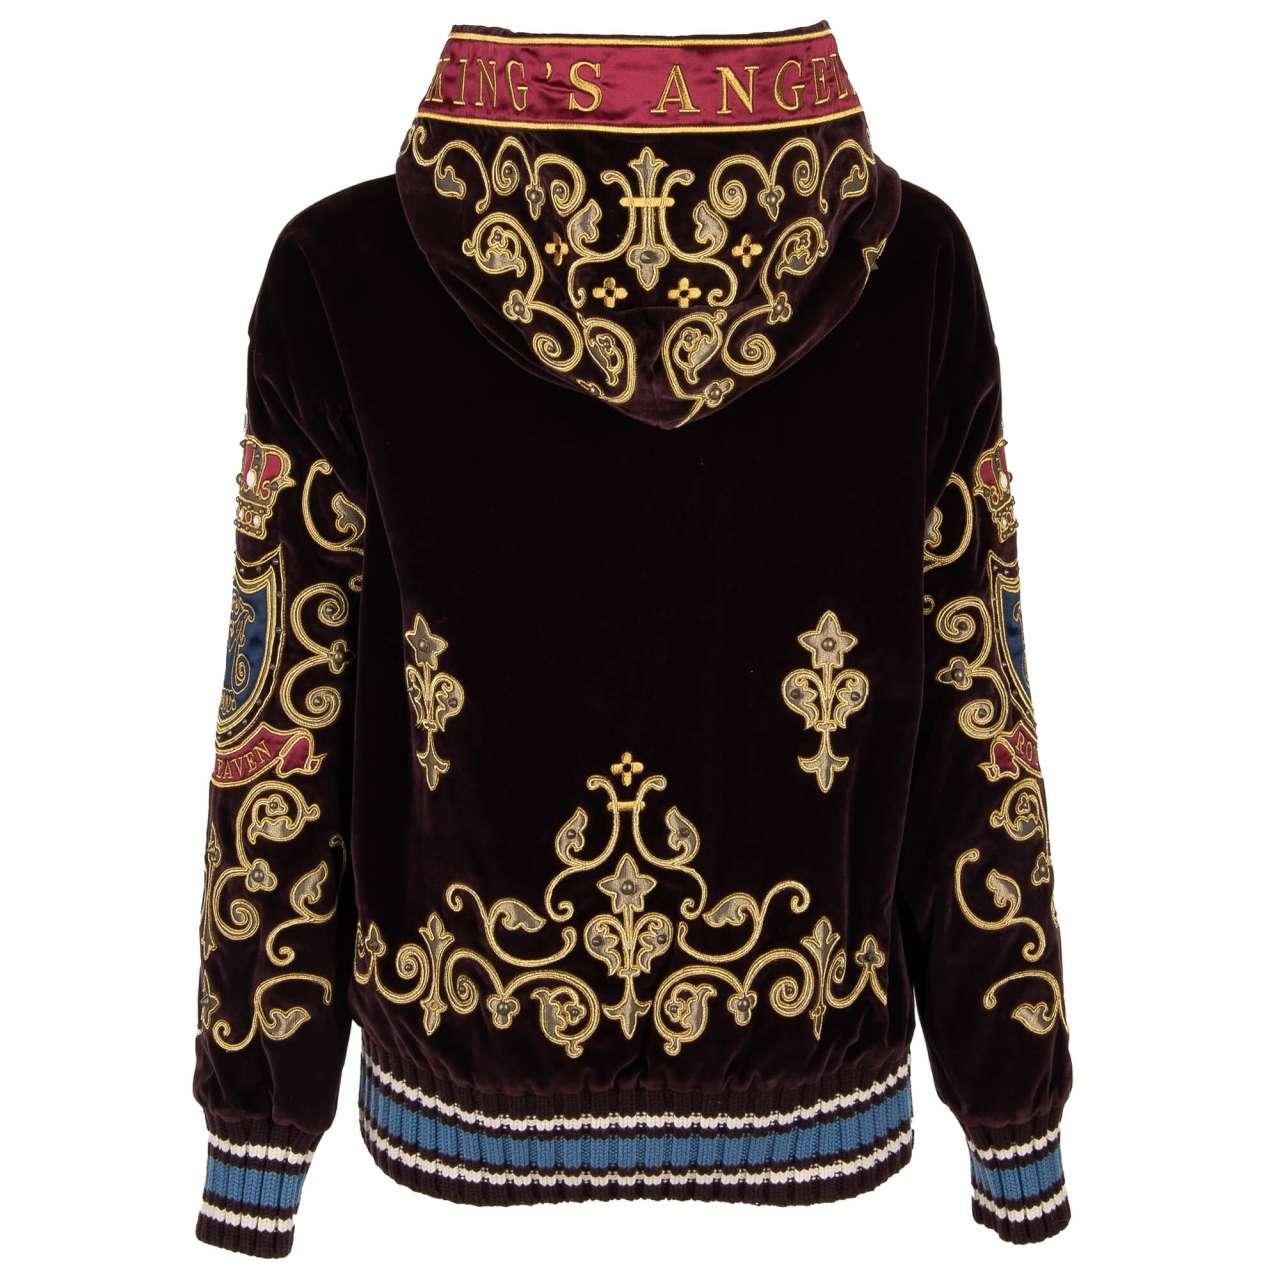 D&G Velvet Hoody Sweater with San Michele Crown King Embroidery Bordeaux Gold 44 In Excellent Condition For Sale In Erkrath, DE